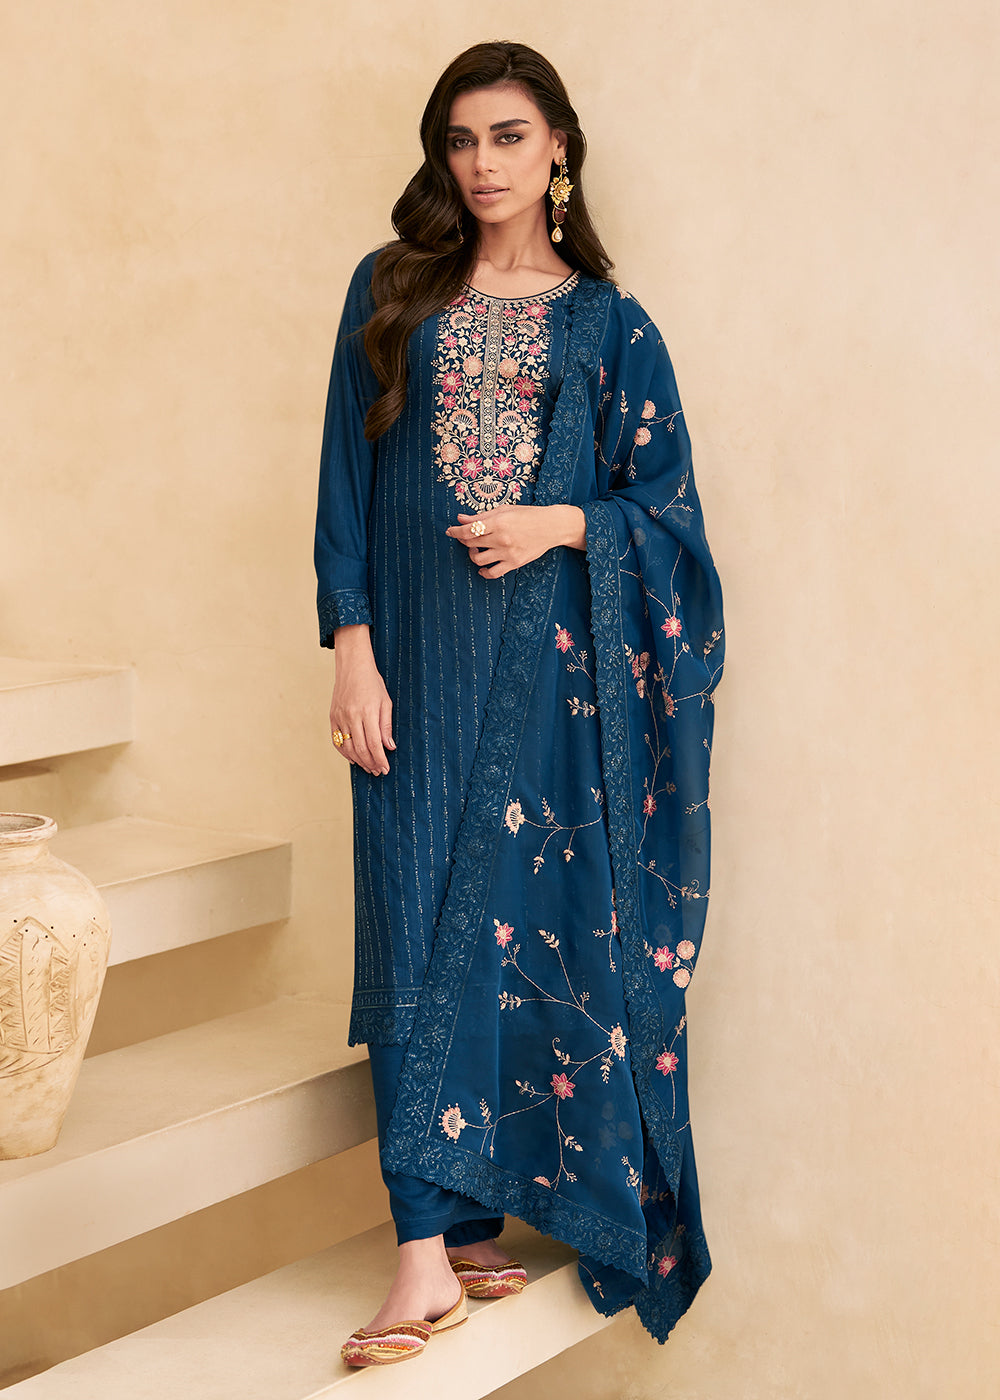 Buy Now Embroidered Blue Dola Silk Festive Style Salwar Suit Online in USA, UK, Canada, Germany, Australia & Worldwide at Empress Clothing. 